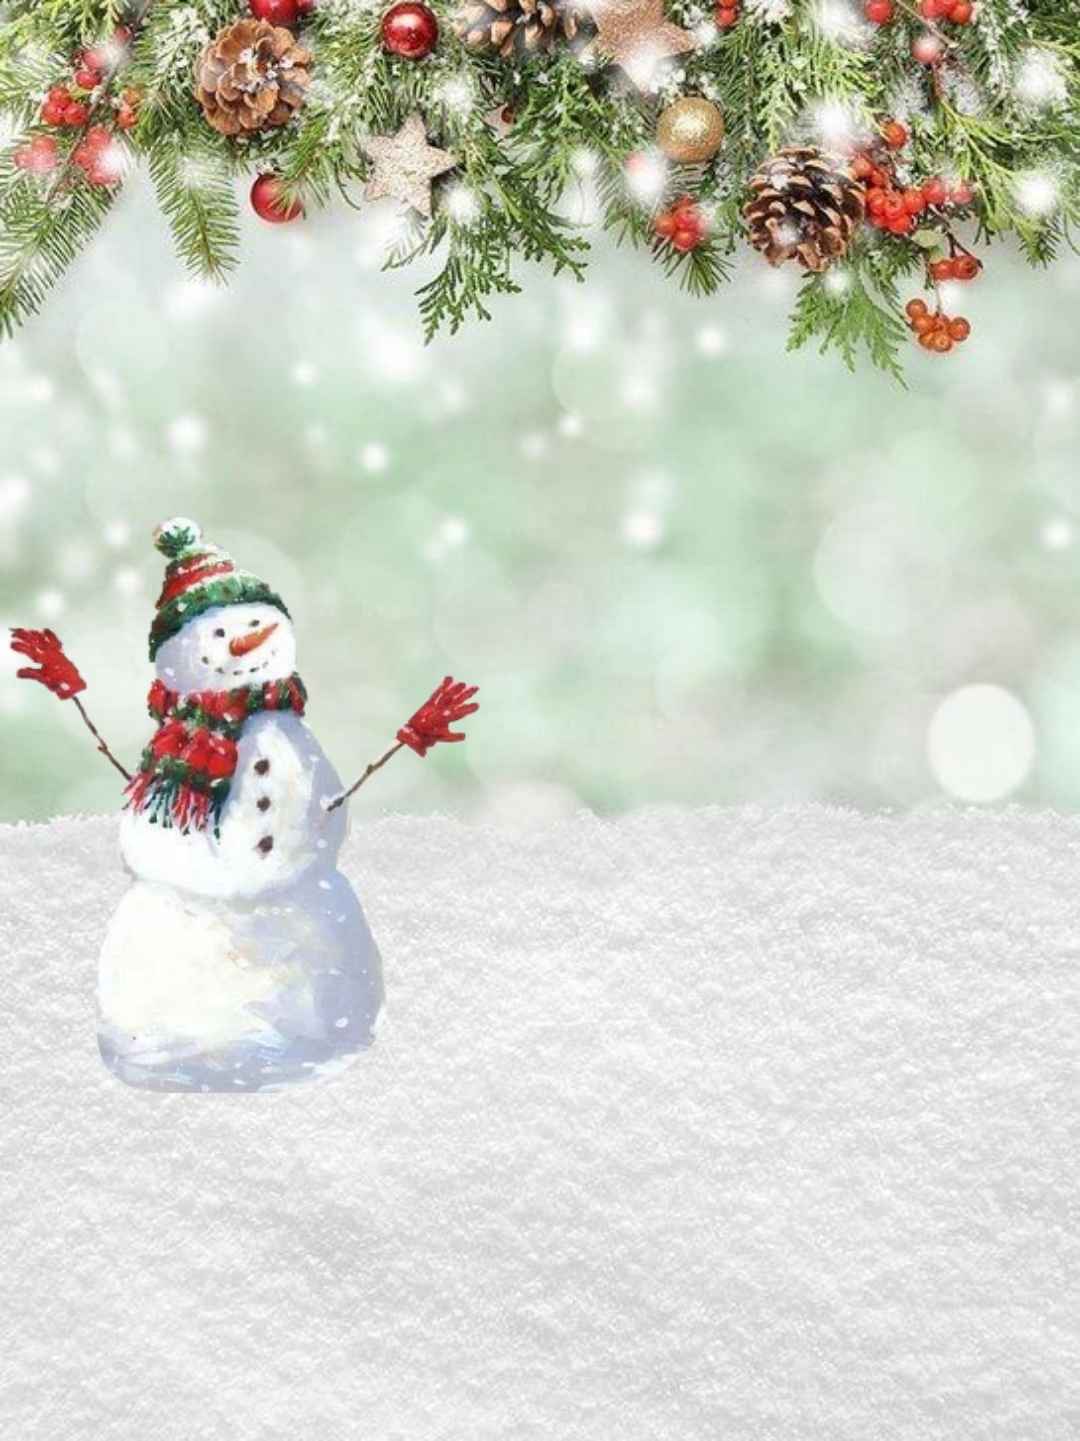 Merry Christmas HD Editing Backgrounds Images